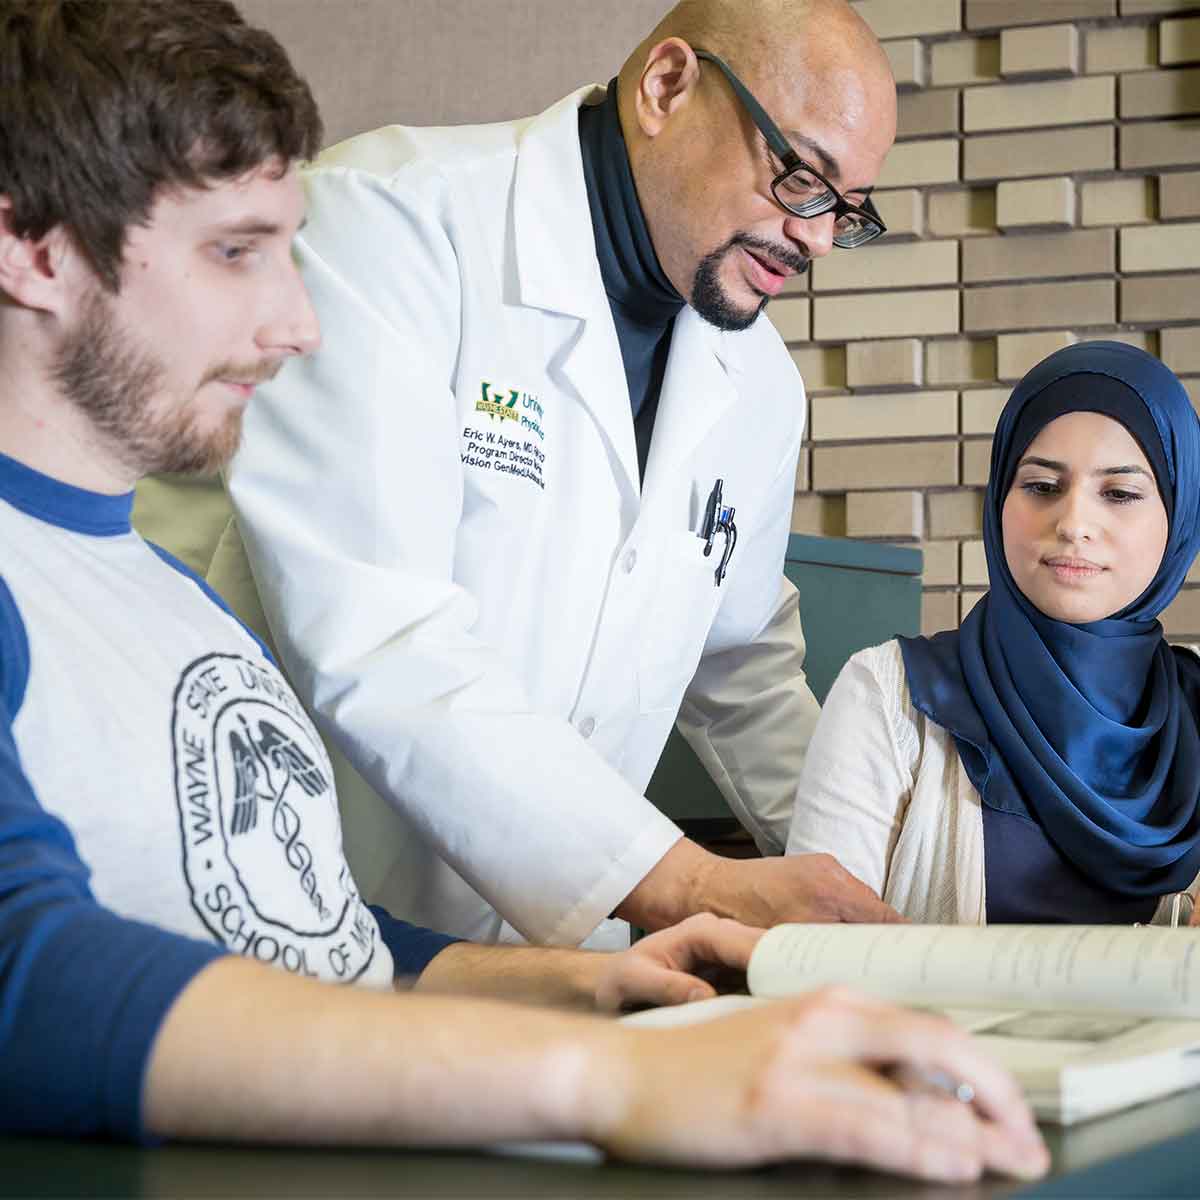 Male professor wearing white coat bending over to talk with male and female students, who are both sitting down at a desk looking at an open book.